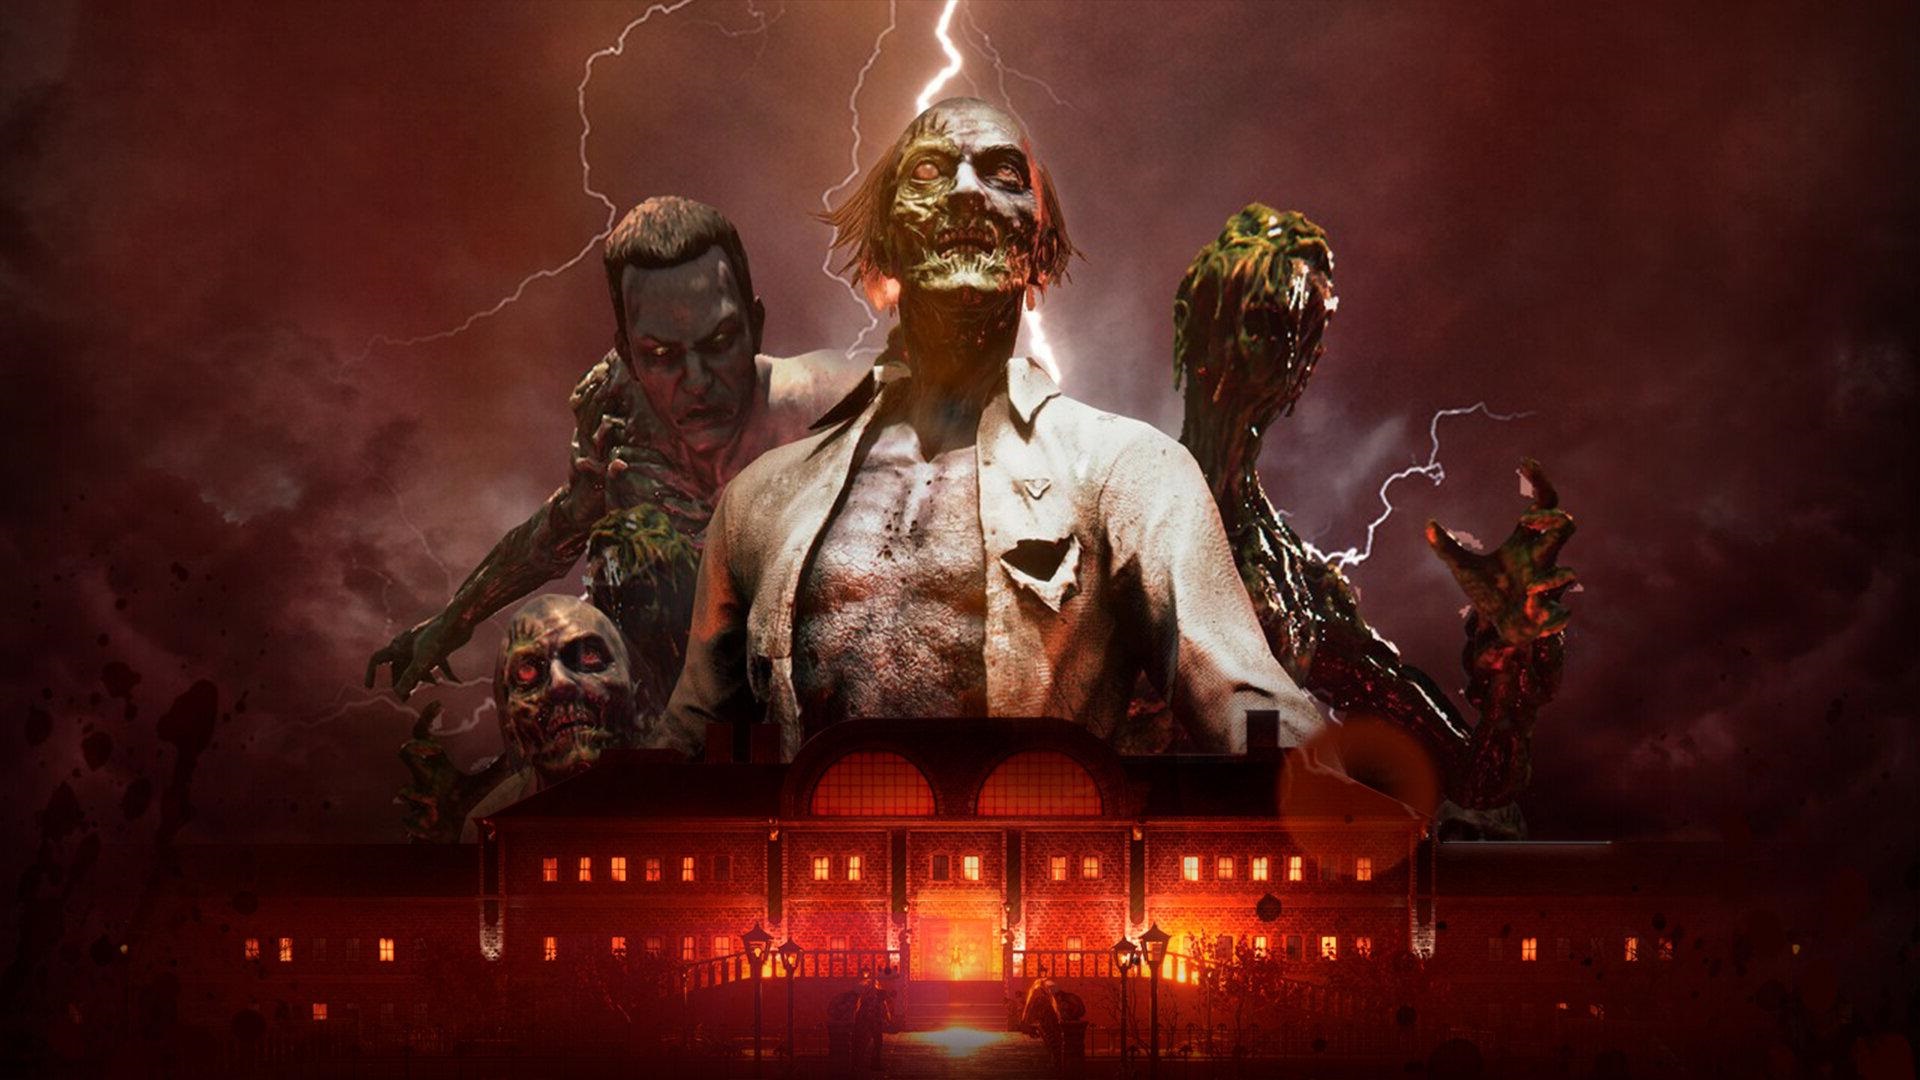 The House Of The Dead: Remake